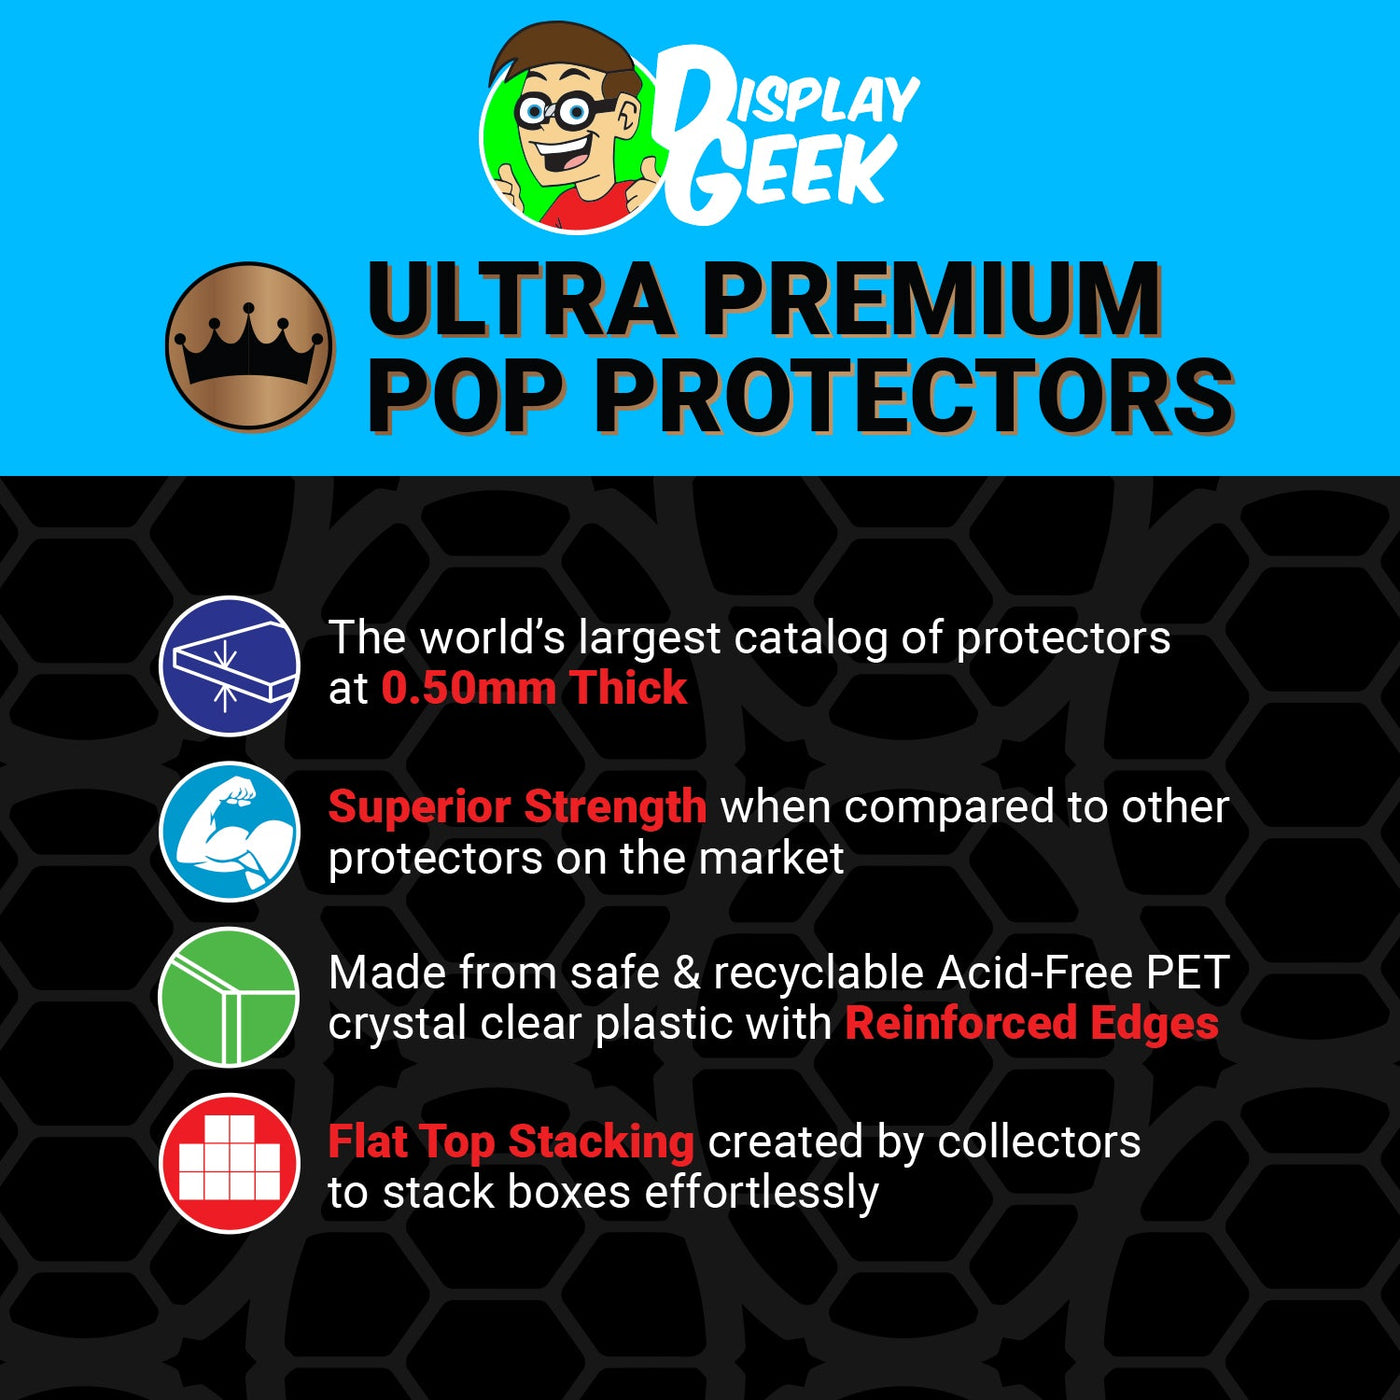 Pop Protector for 2 Pack Mini Aurora & Maleficent #07 Funko Pop on The Protector Guide App by Display Geek